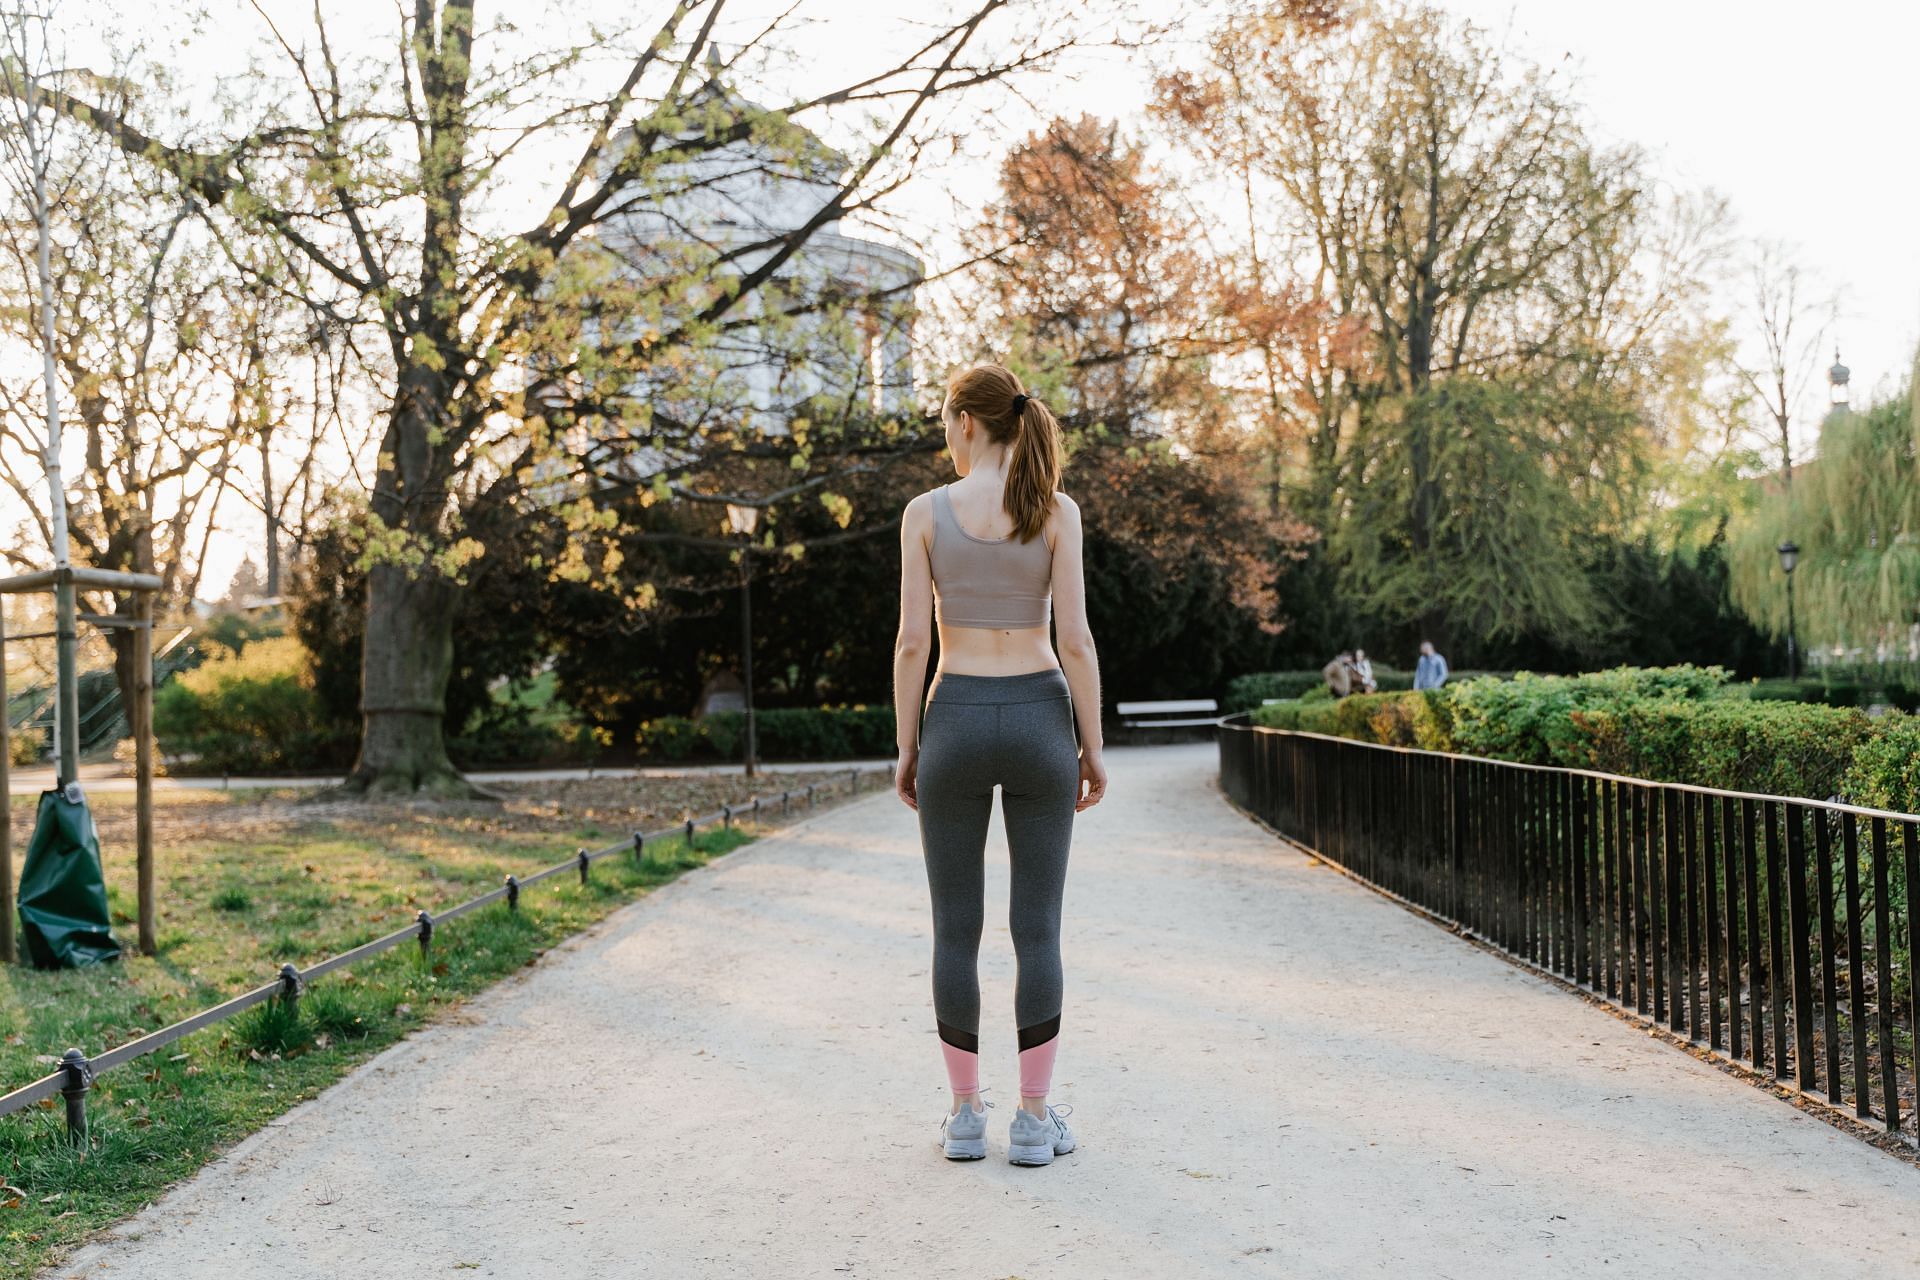 Incorporate inclines or slopes in your walking for weight loss routine. (Image via Pexels/ Mart Production)